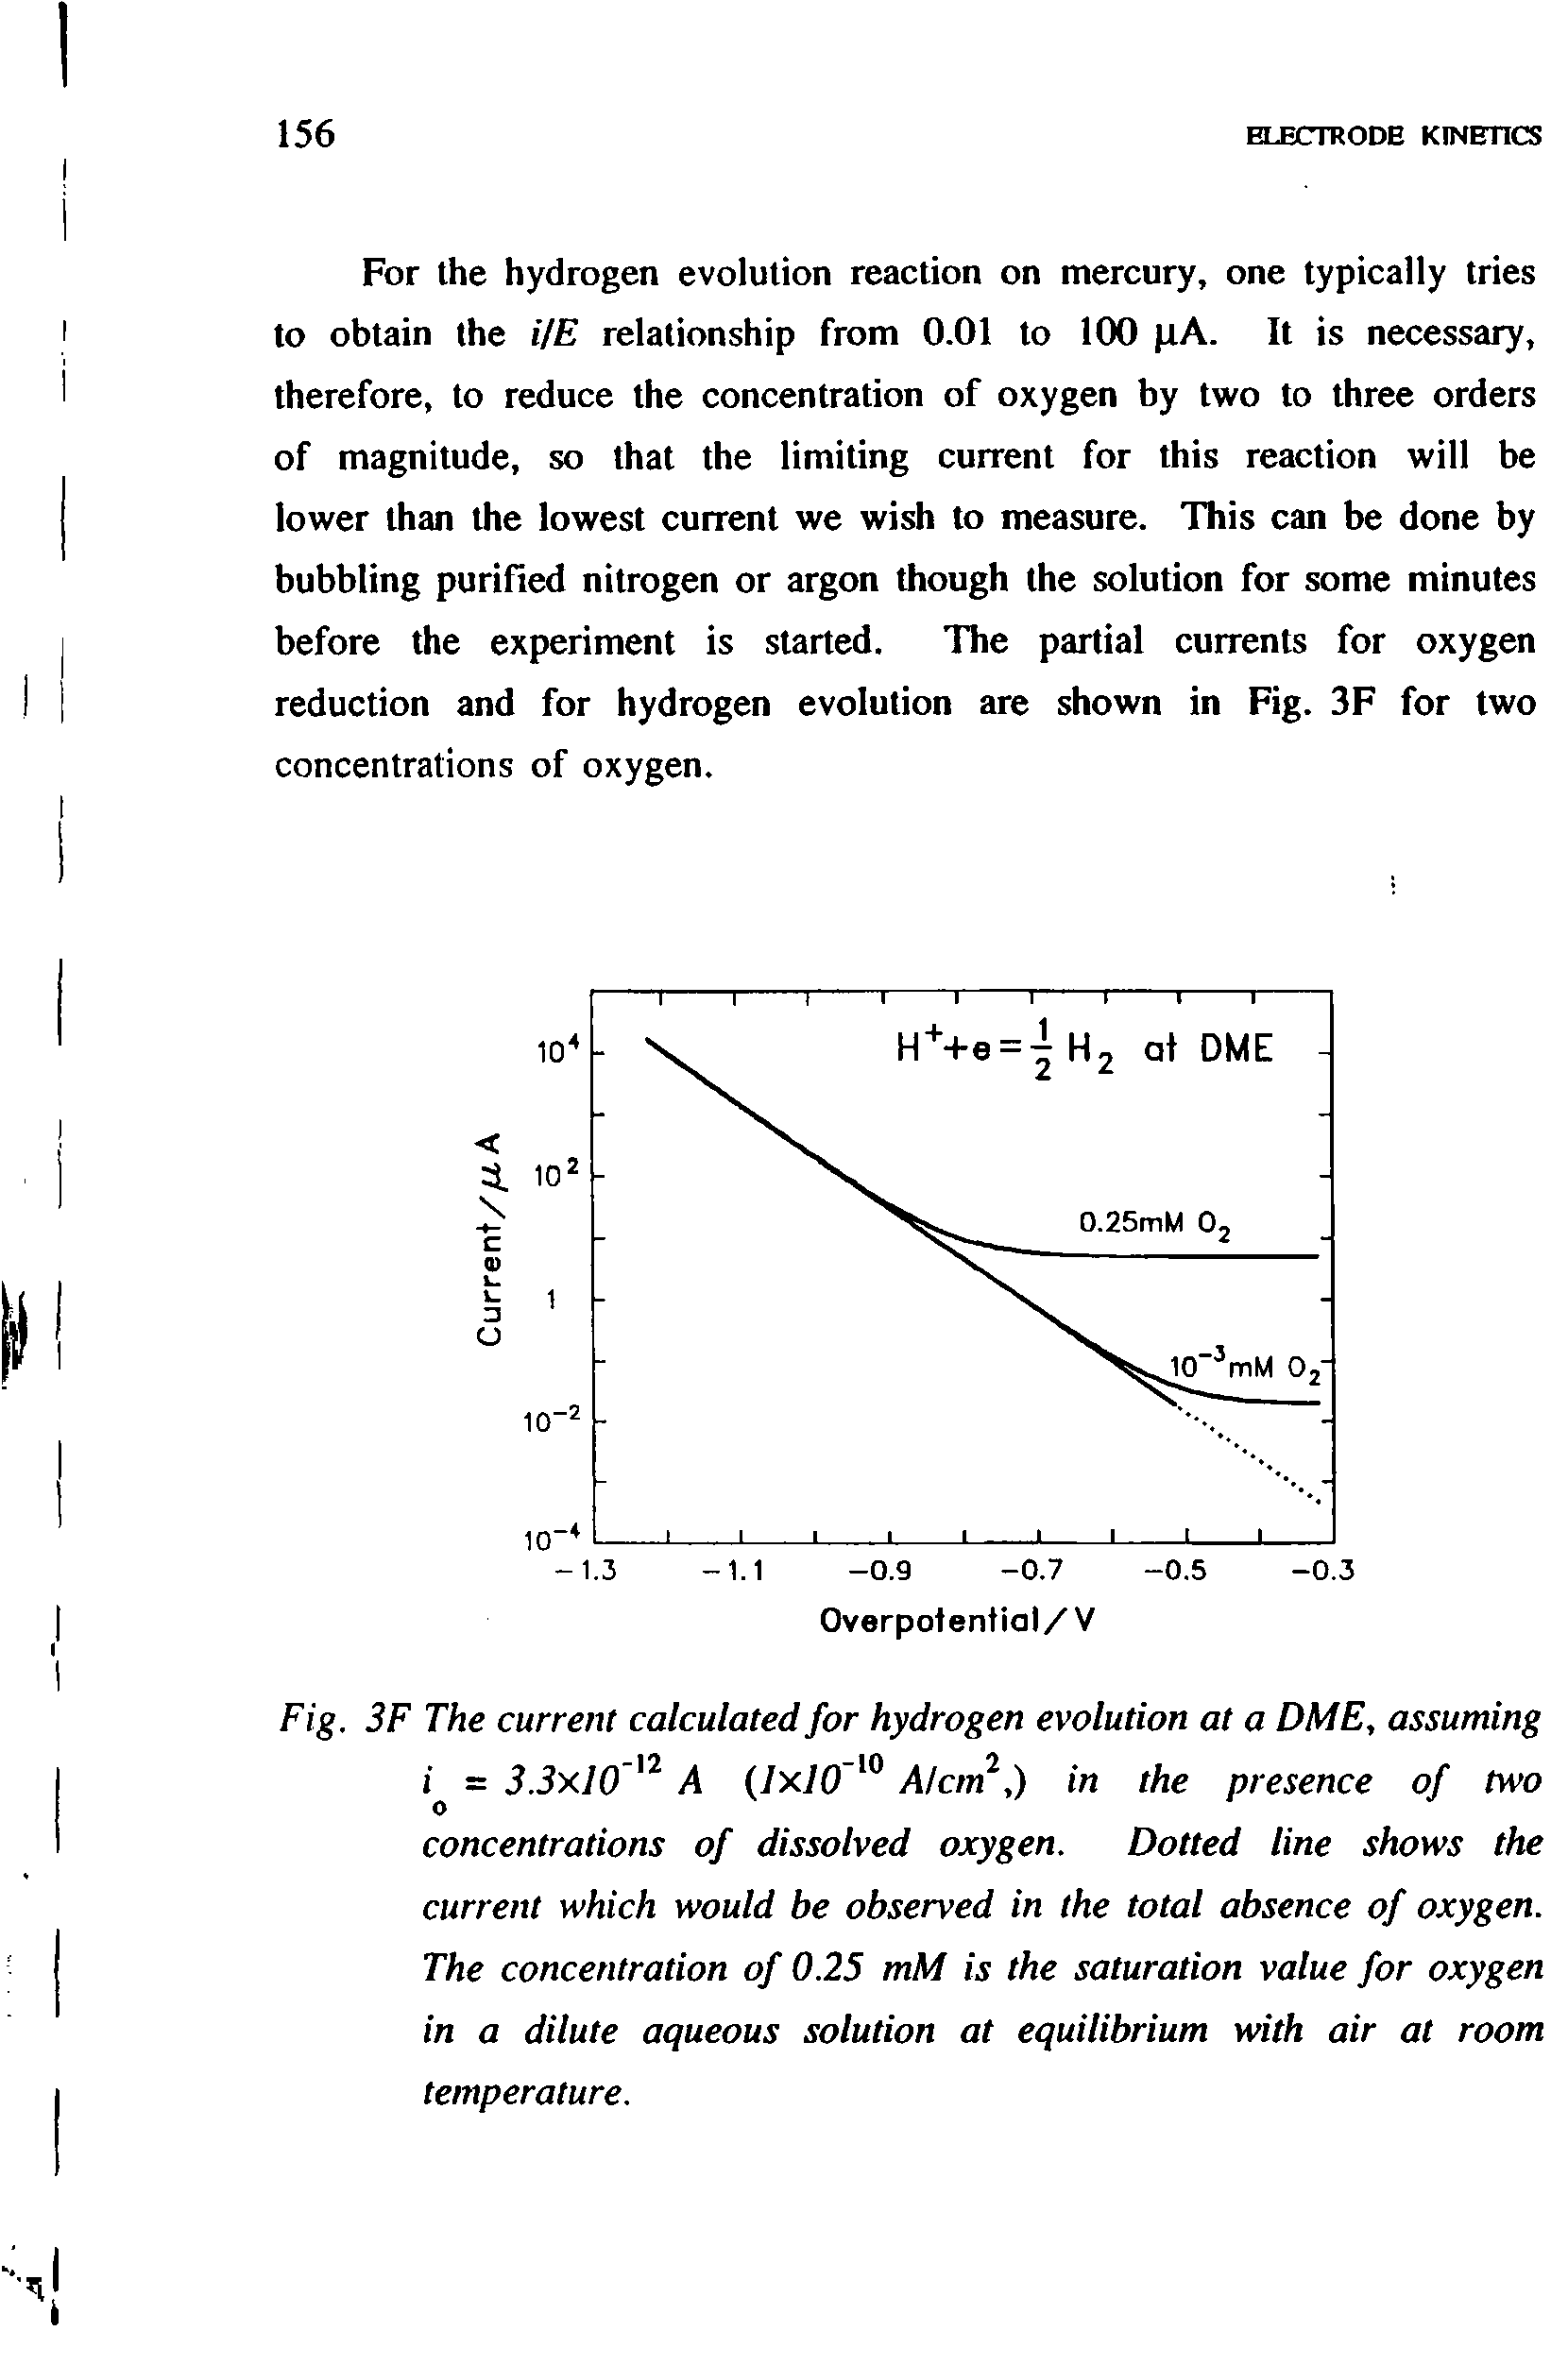 Fig. 3F The current calculated for hydrogen evolution at a DME, assuming i = 3.3x10 A (7x70 Alcm, ) in the presence of two concentrations of dissolved oxygen. Dotted line shows the current which would be observed in the total absence of oxygen. The concentration of 0.25 mM is the saturation value for oxygen in a dilute aqueous solution at equilibrium with air at room temperature.